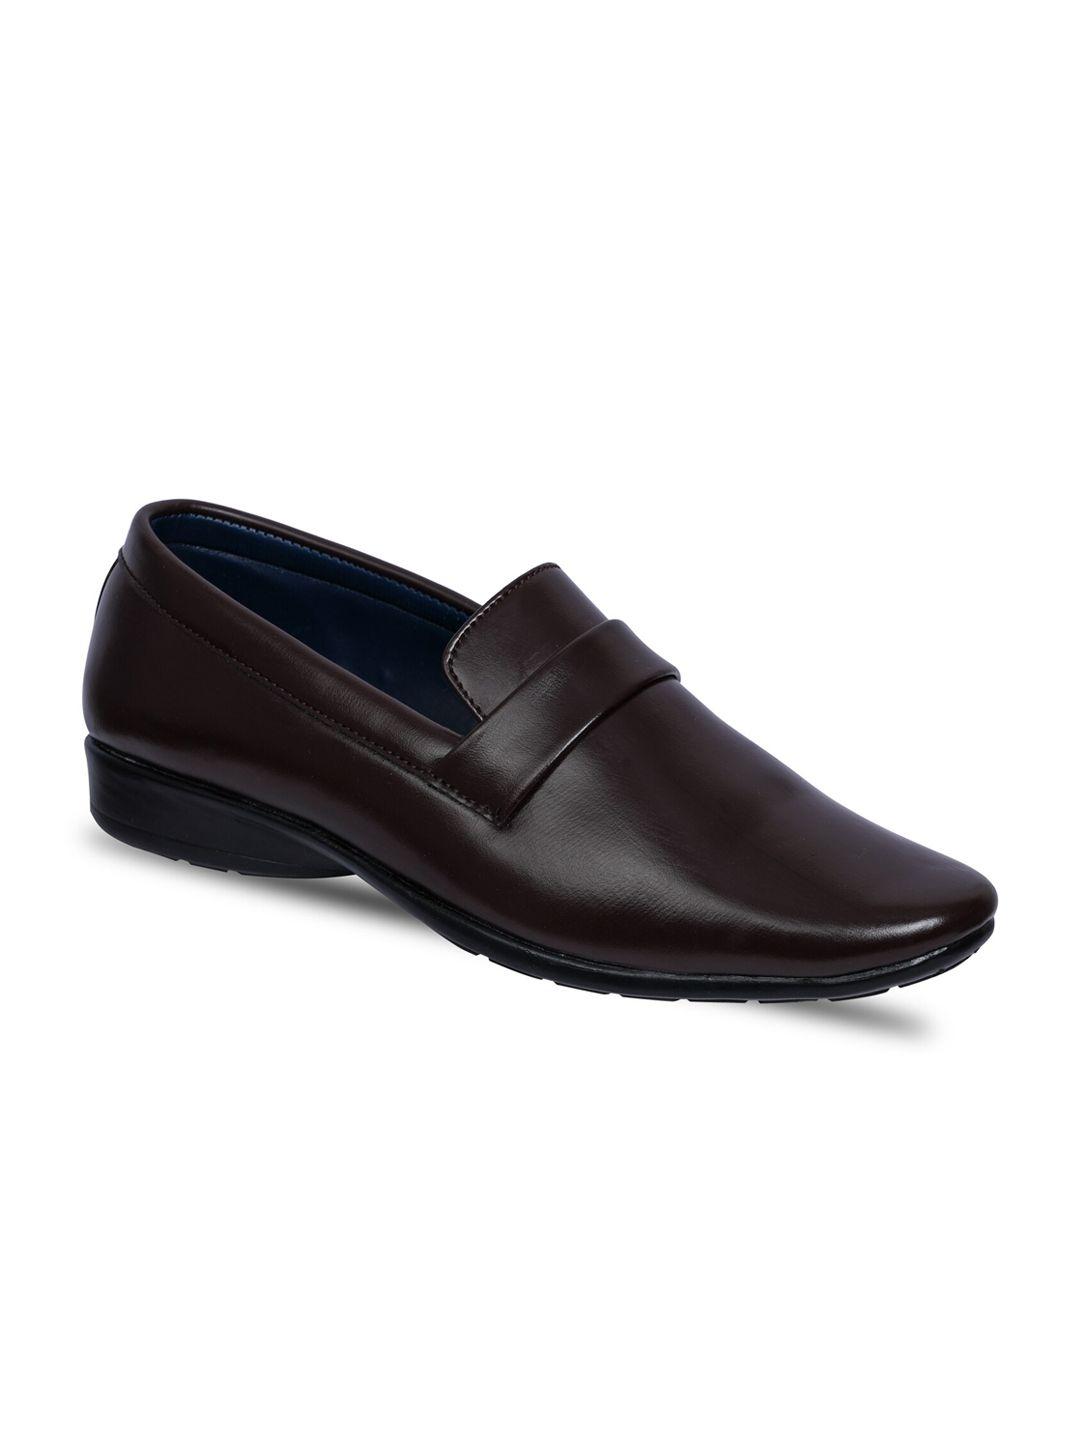 paragon-men-textured-formal-loafers